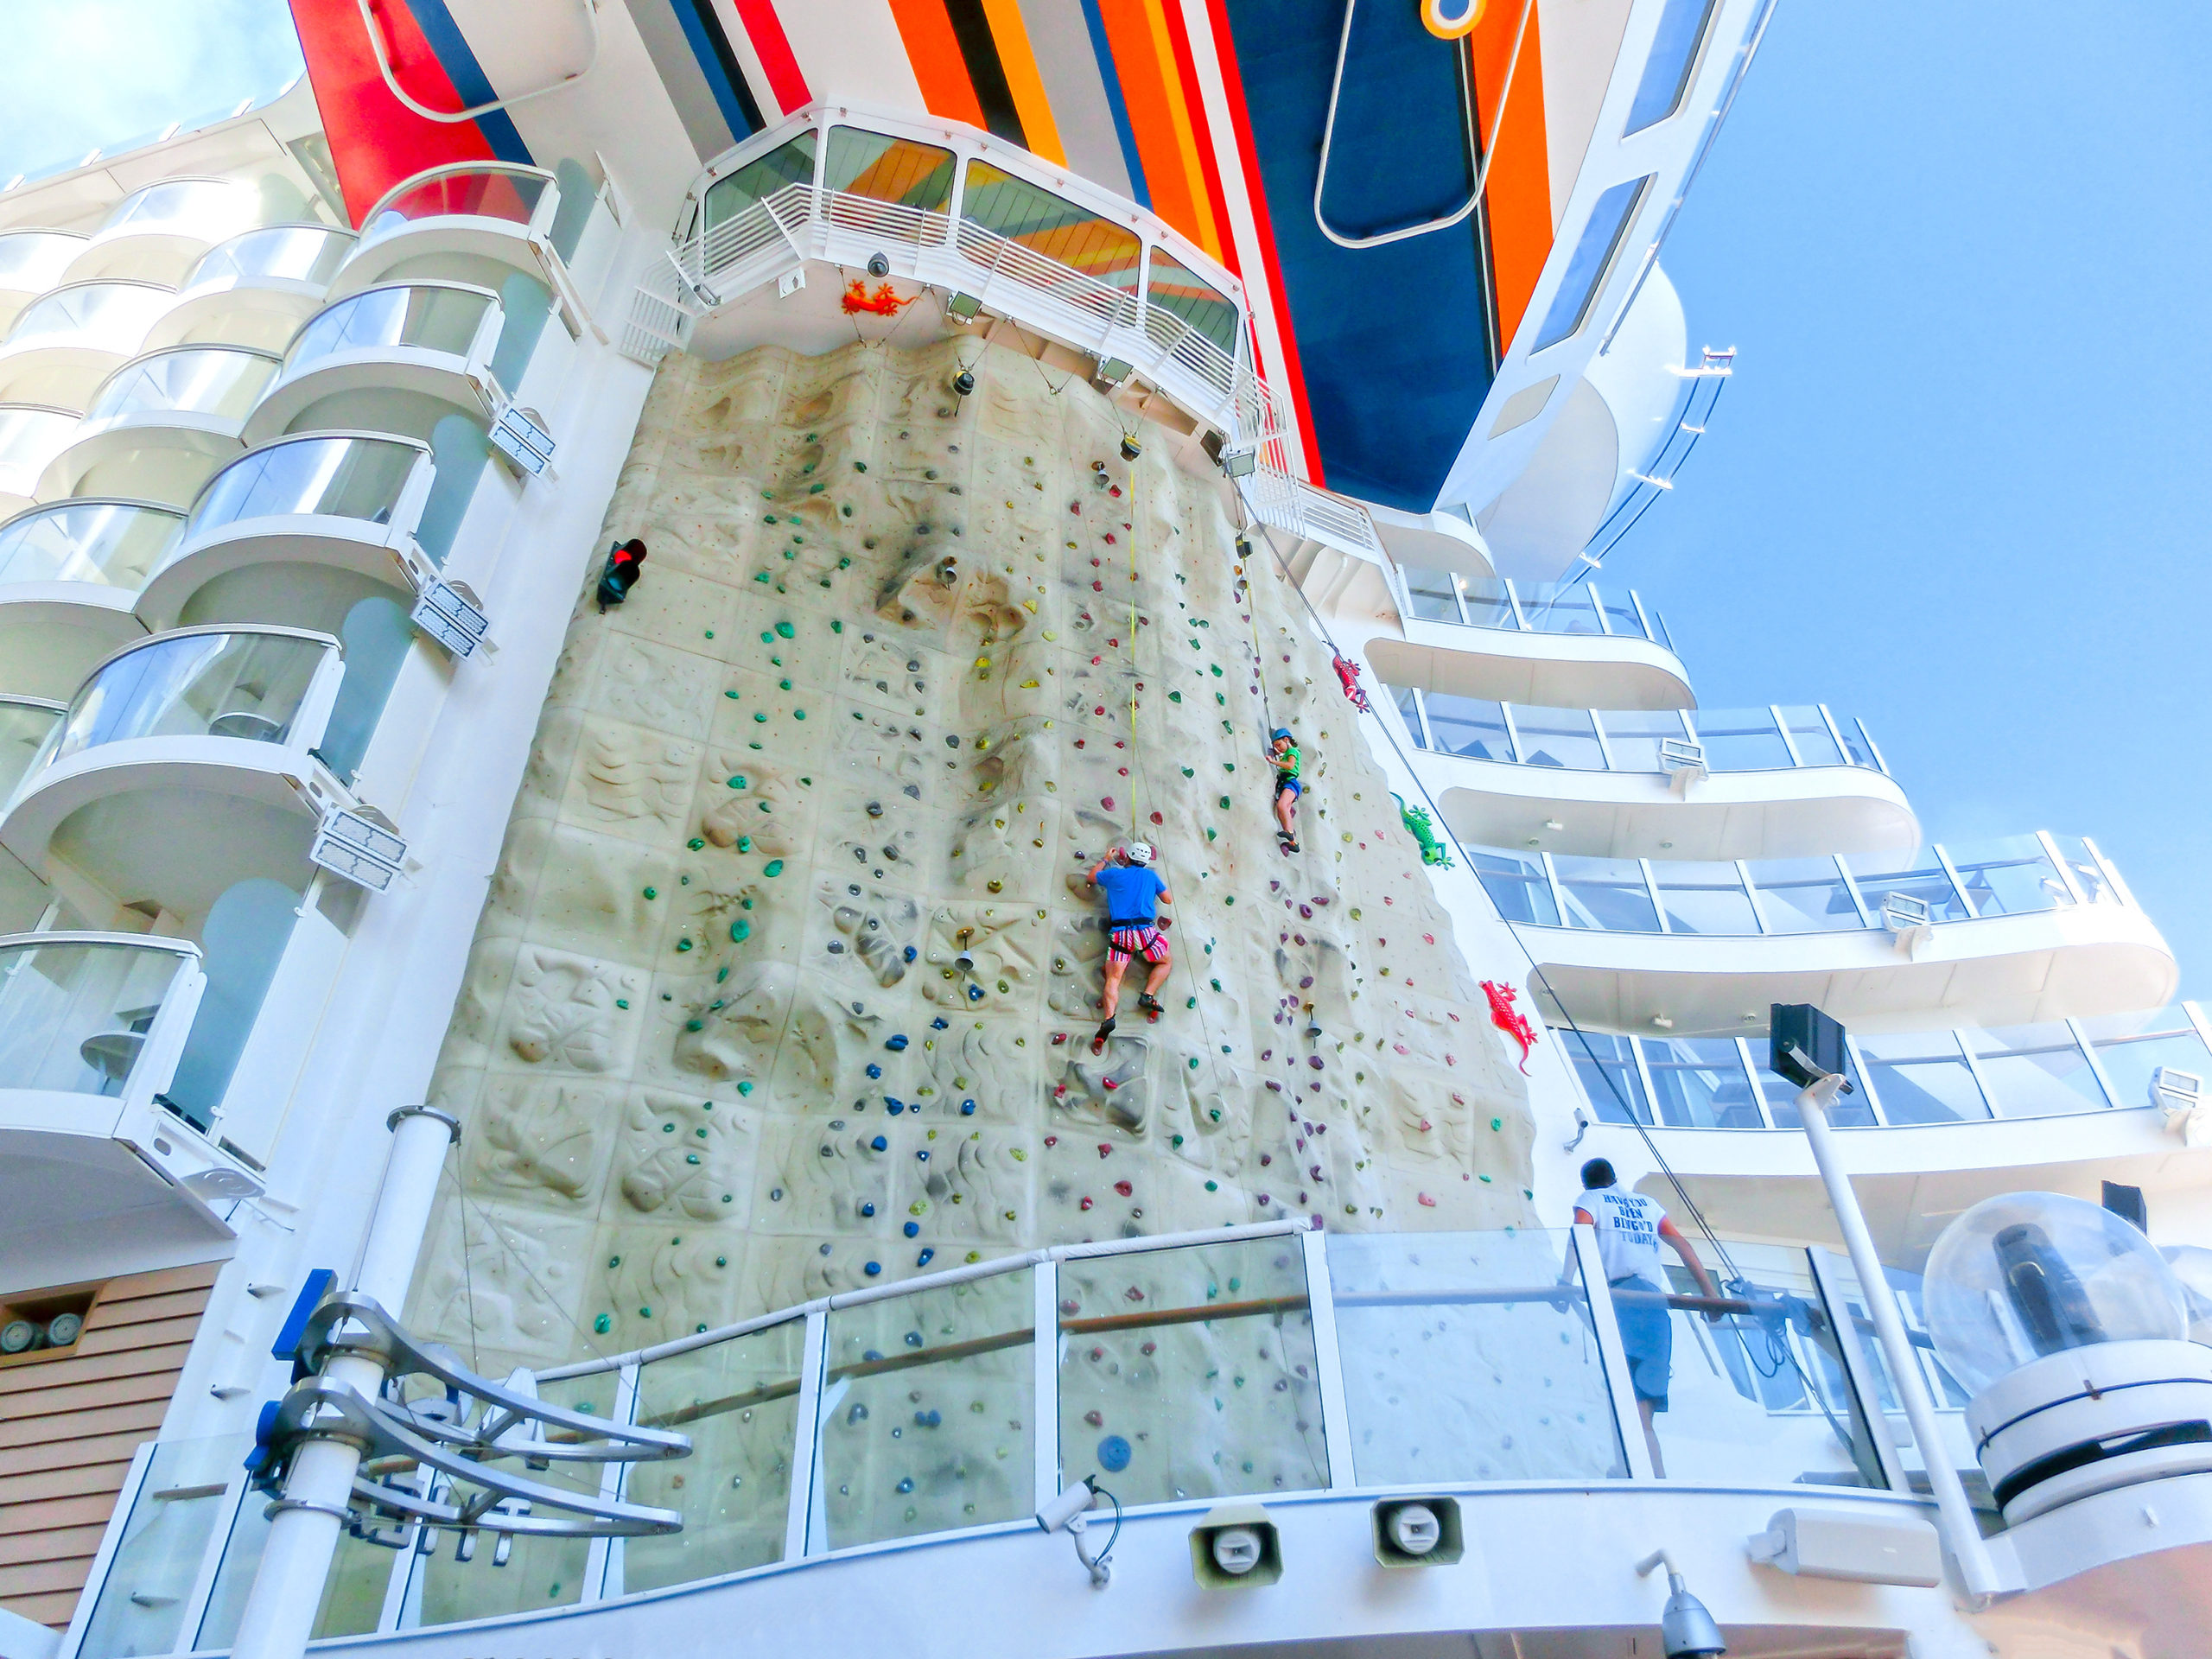 A huge rock climbing wall facing the blue sea is one of the best onboard activities on the Royal Caribbean cruise ships.